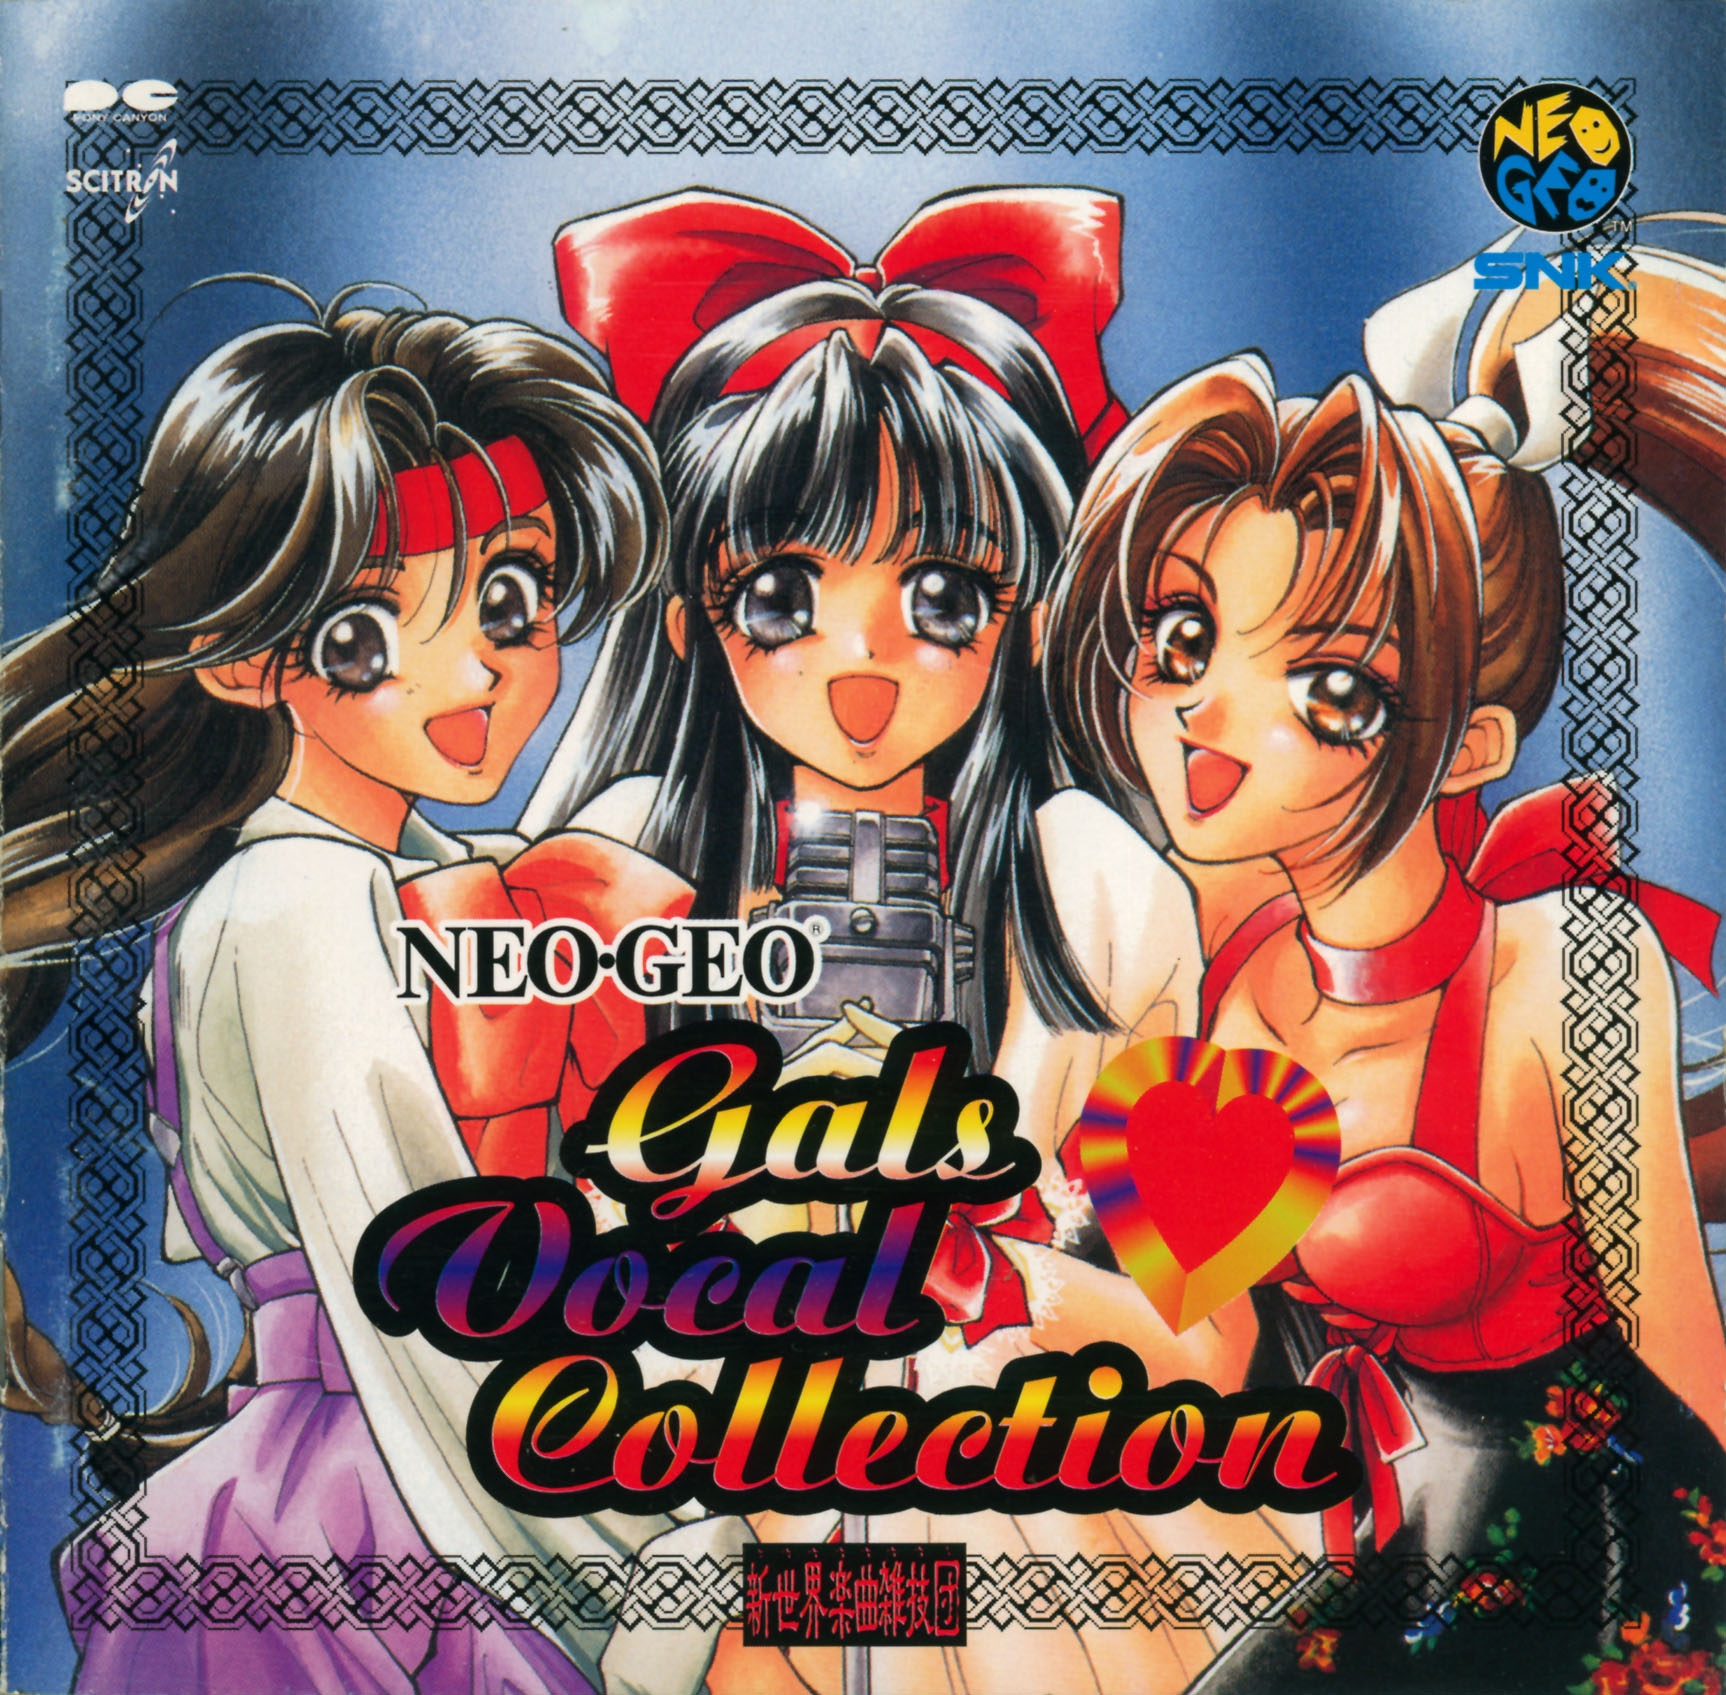 NEO-GEO GalsVocal Collection (1996) MP3 - Download NEO-GEO GalsVocal  Collection (1996) Soundtracks for FREE!